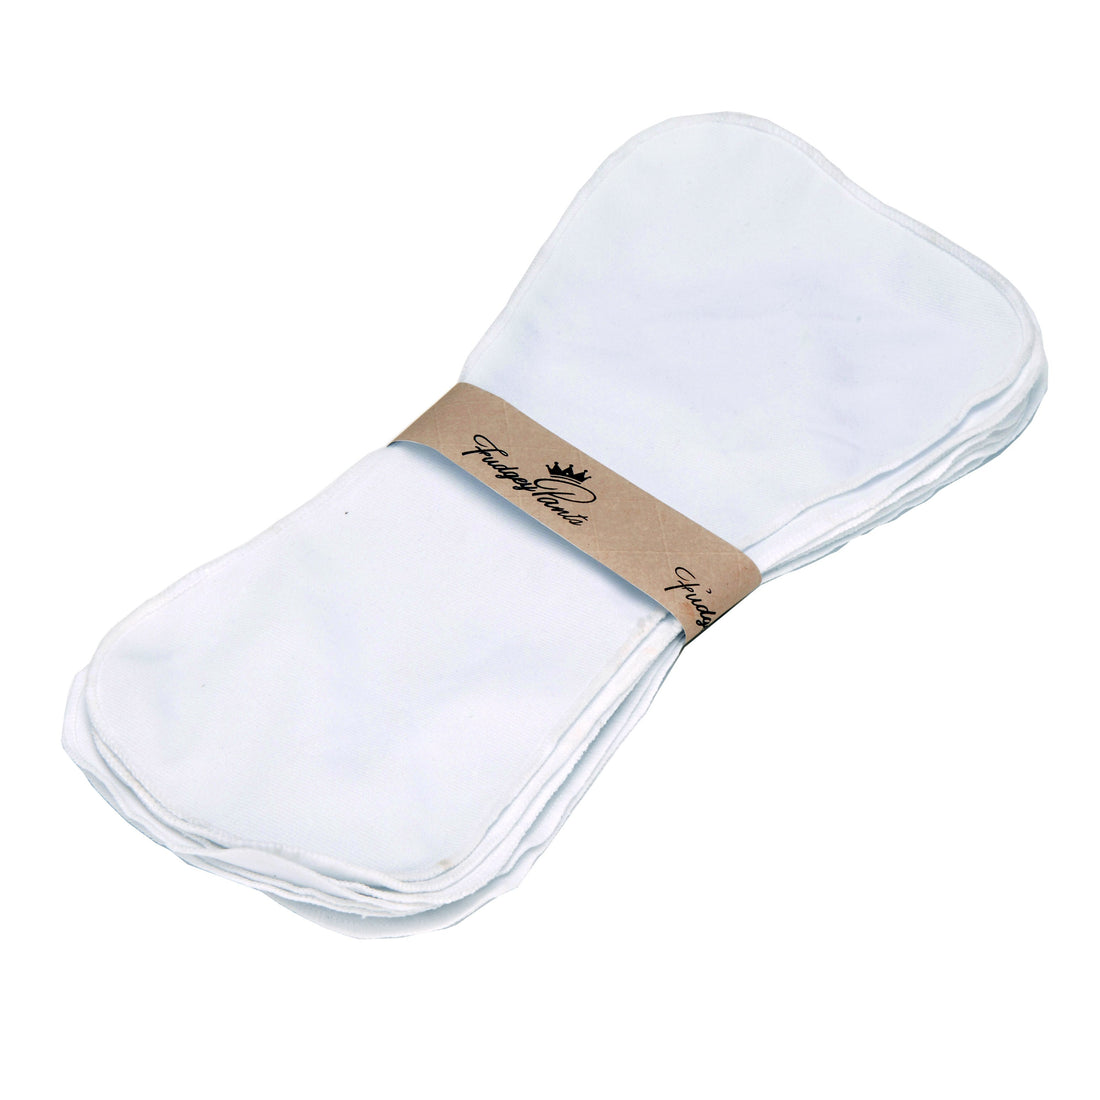 10 pack - Reusable Nappy Liners - Fudgey Pants